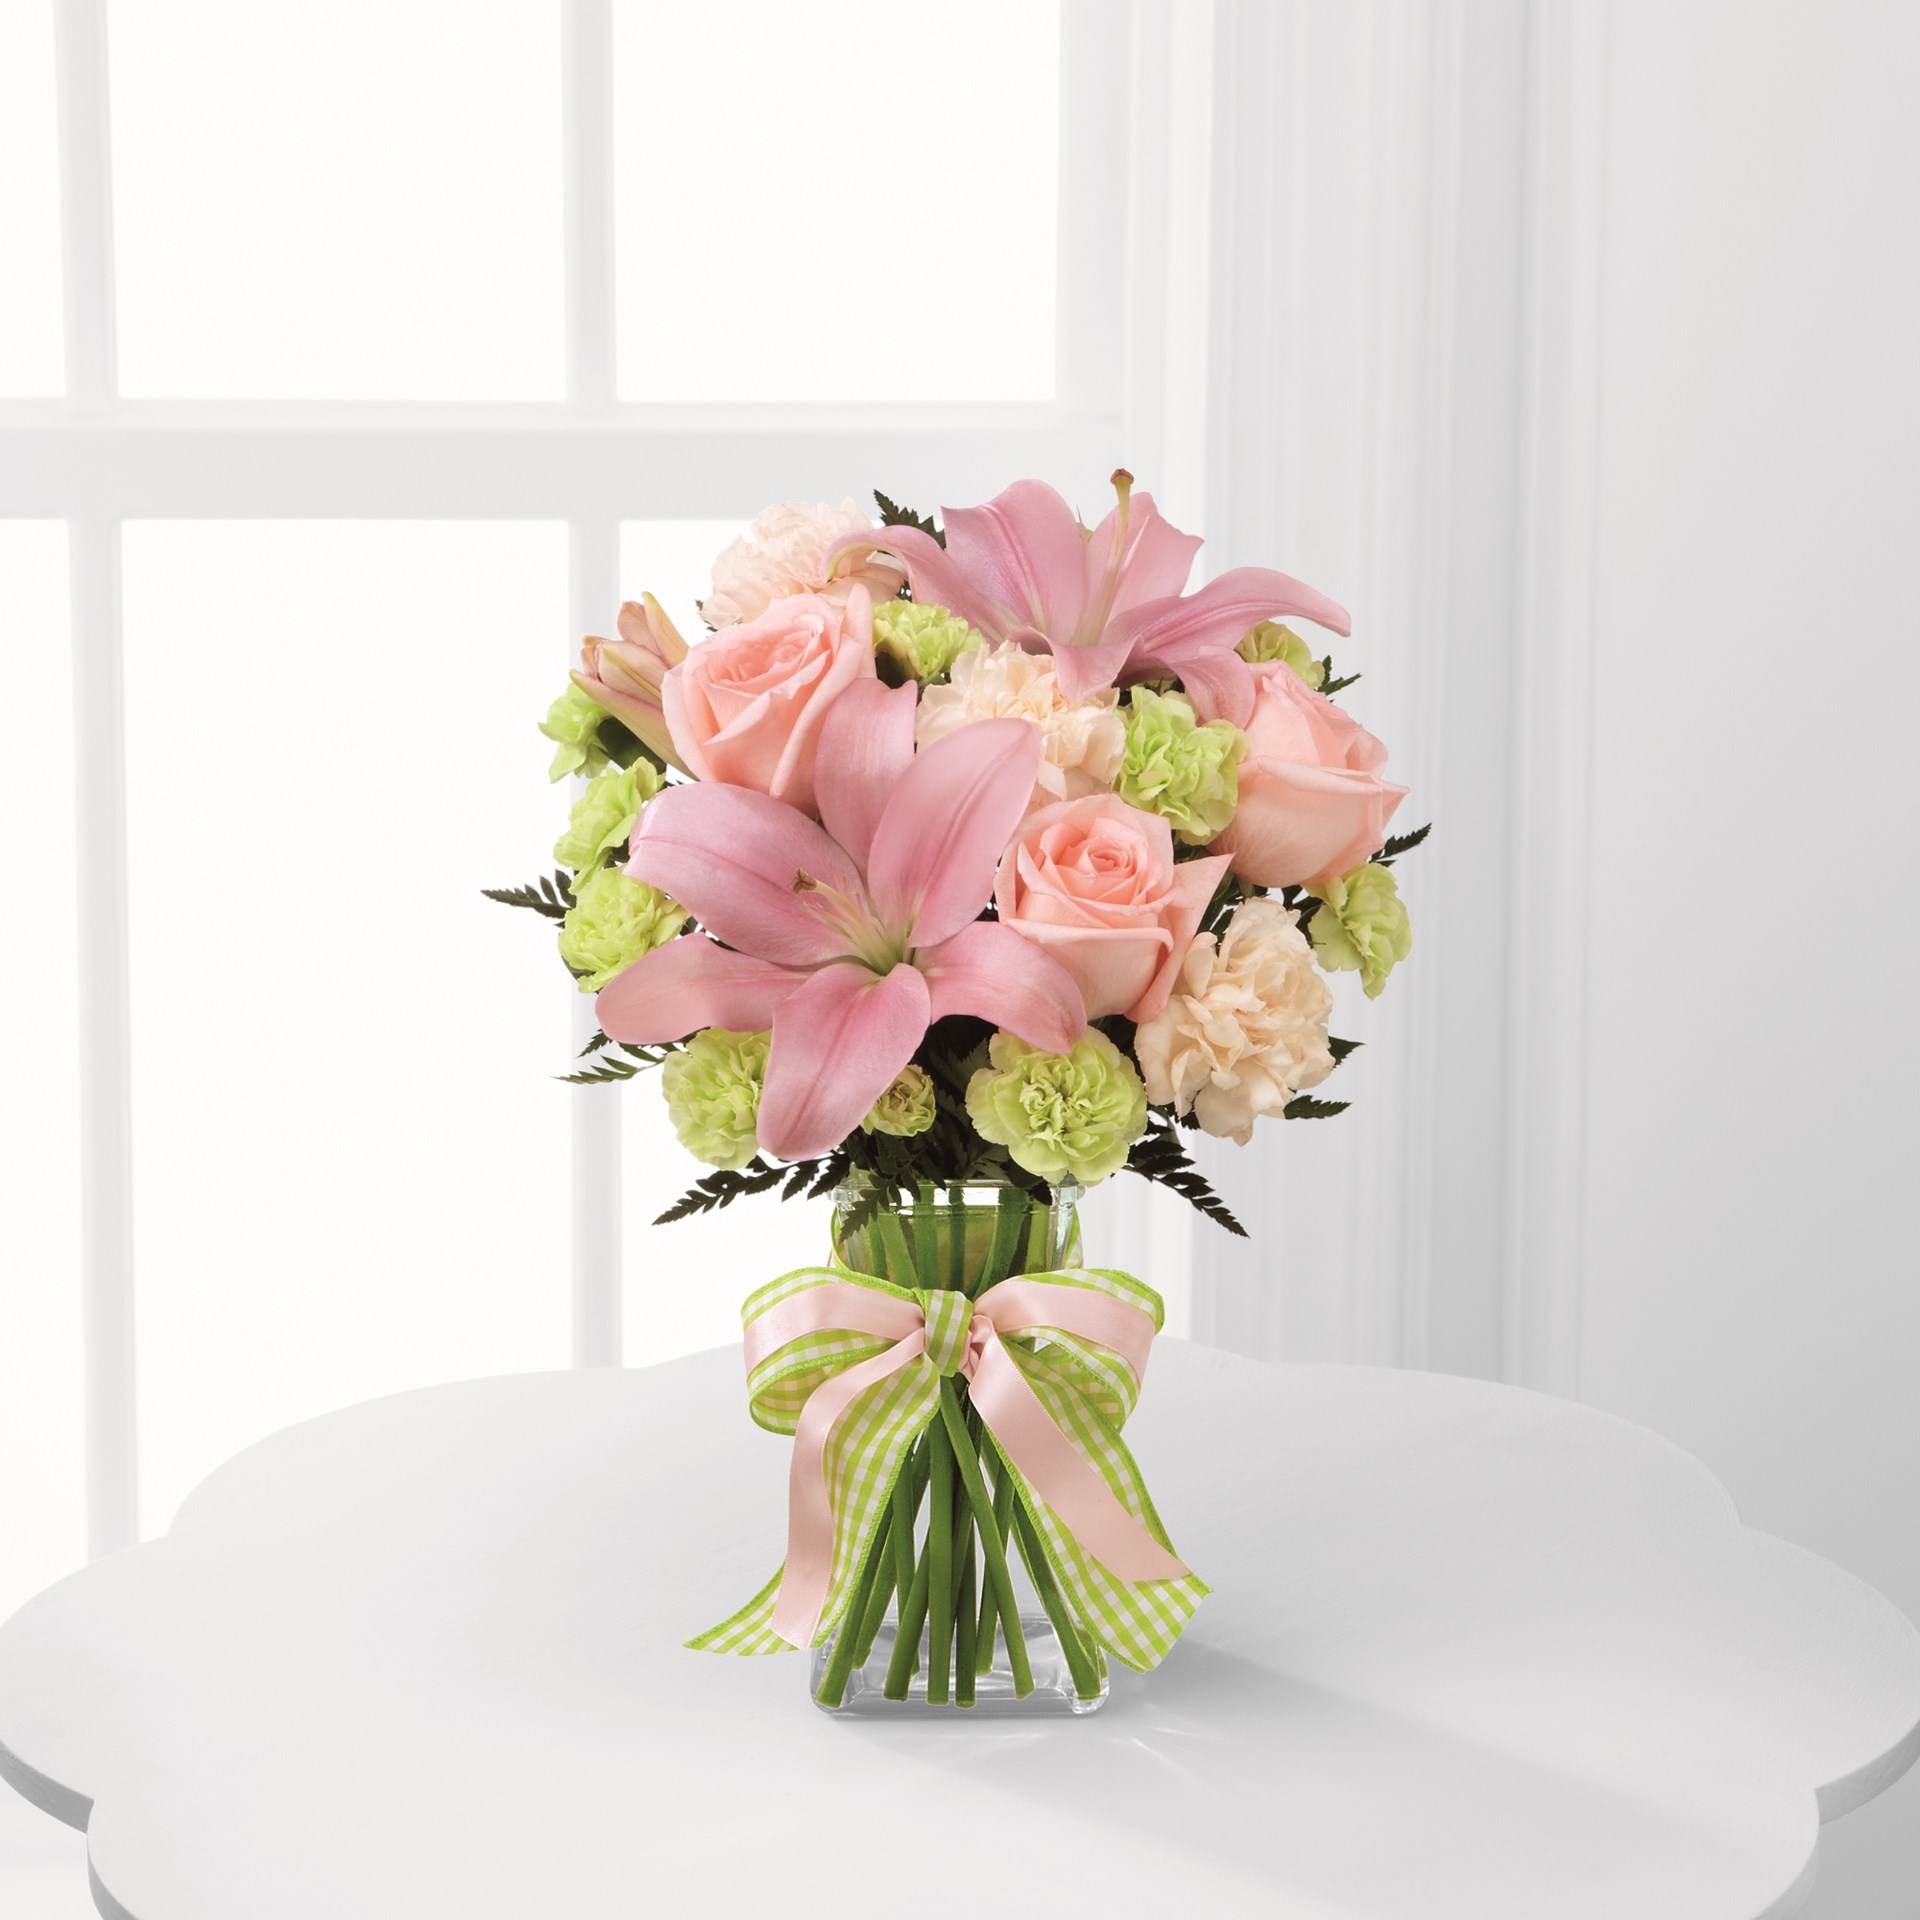 The Girl Power Bouquet by FTD - VASE INCLUDED